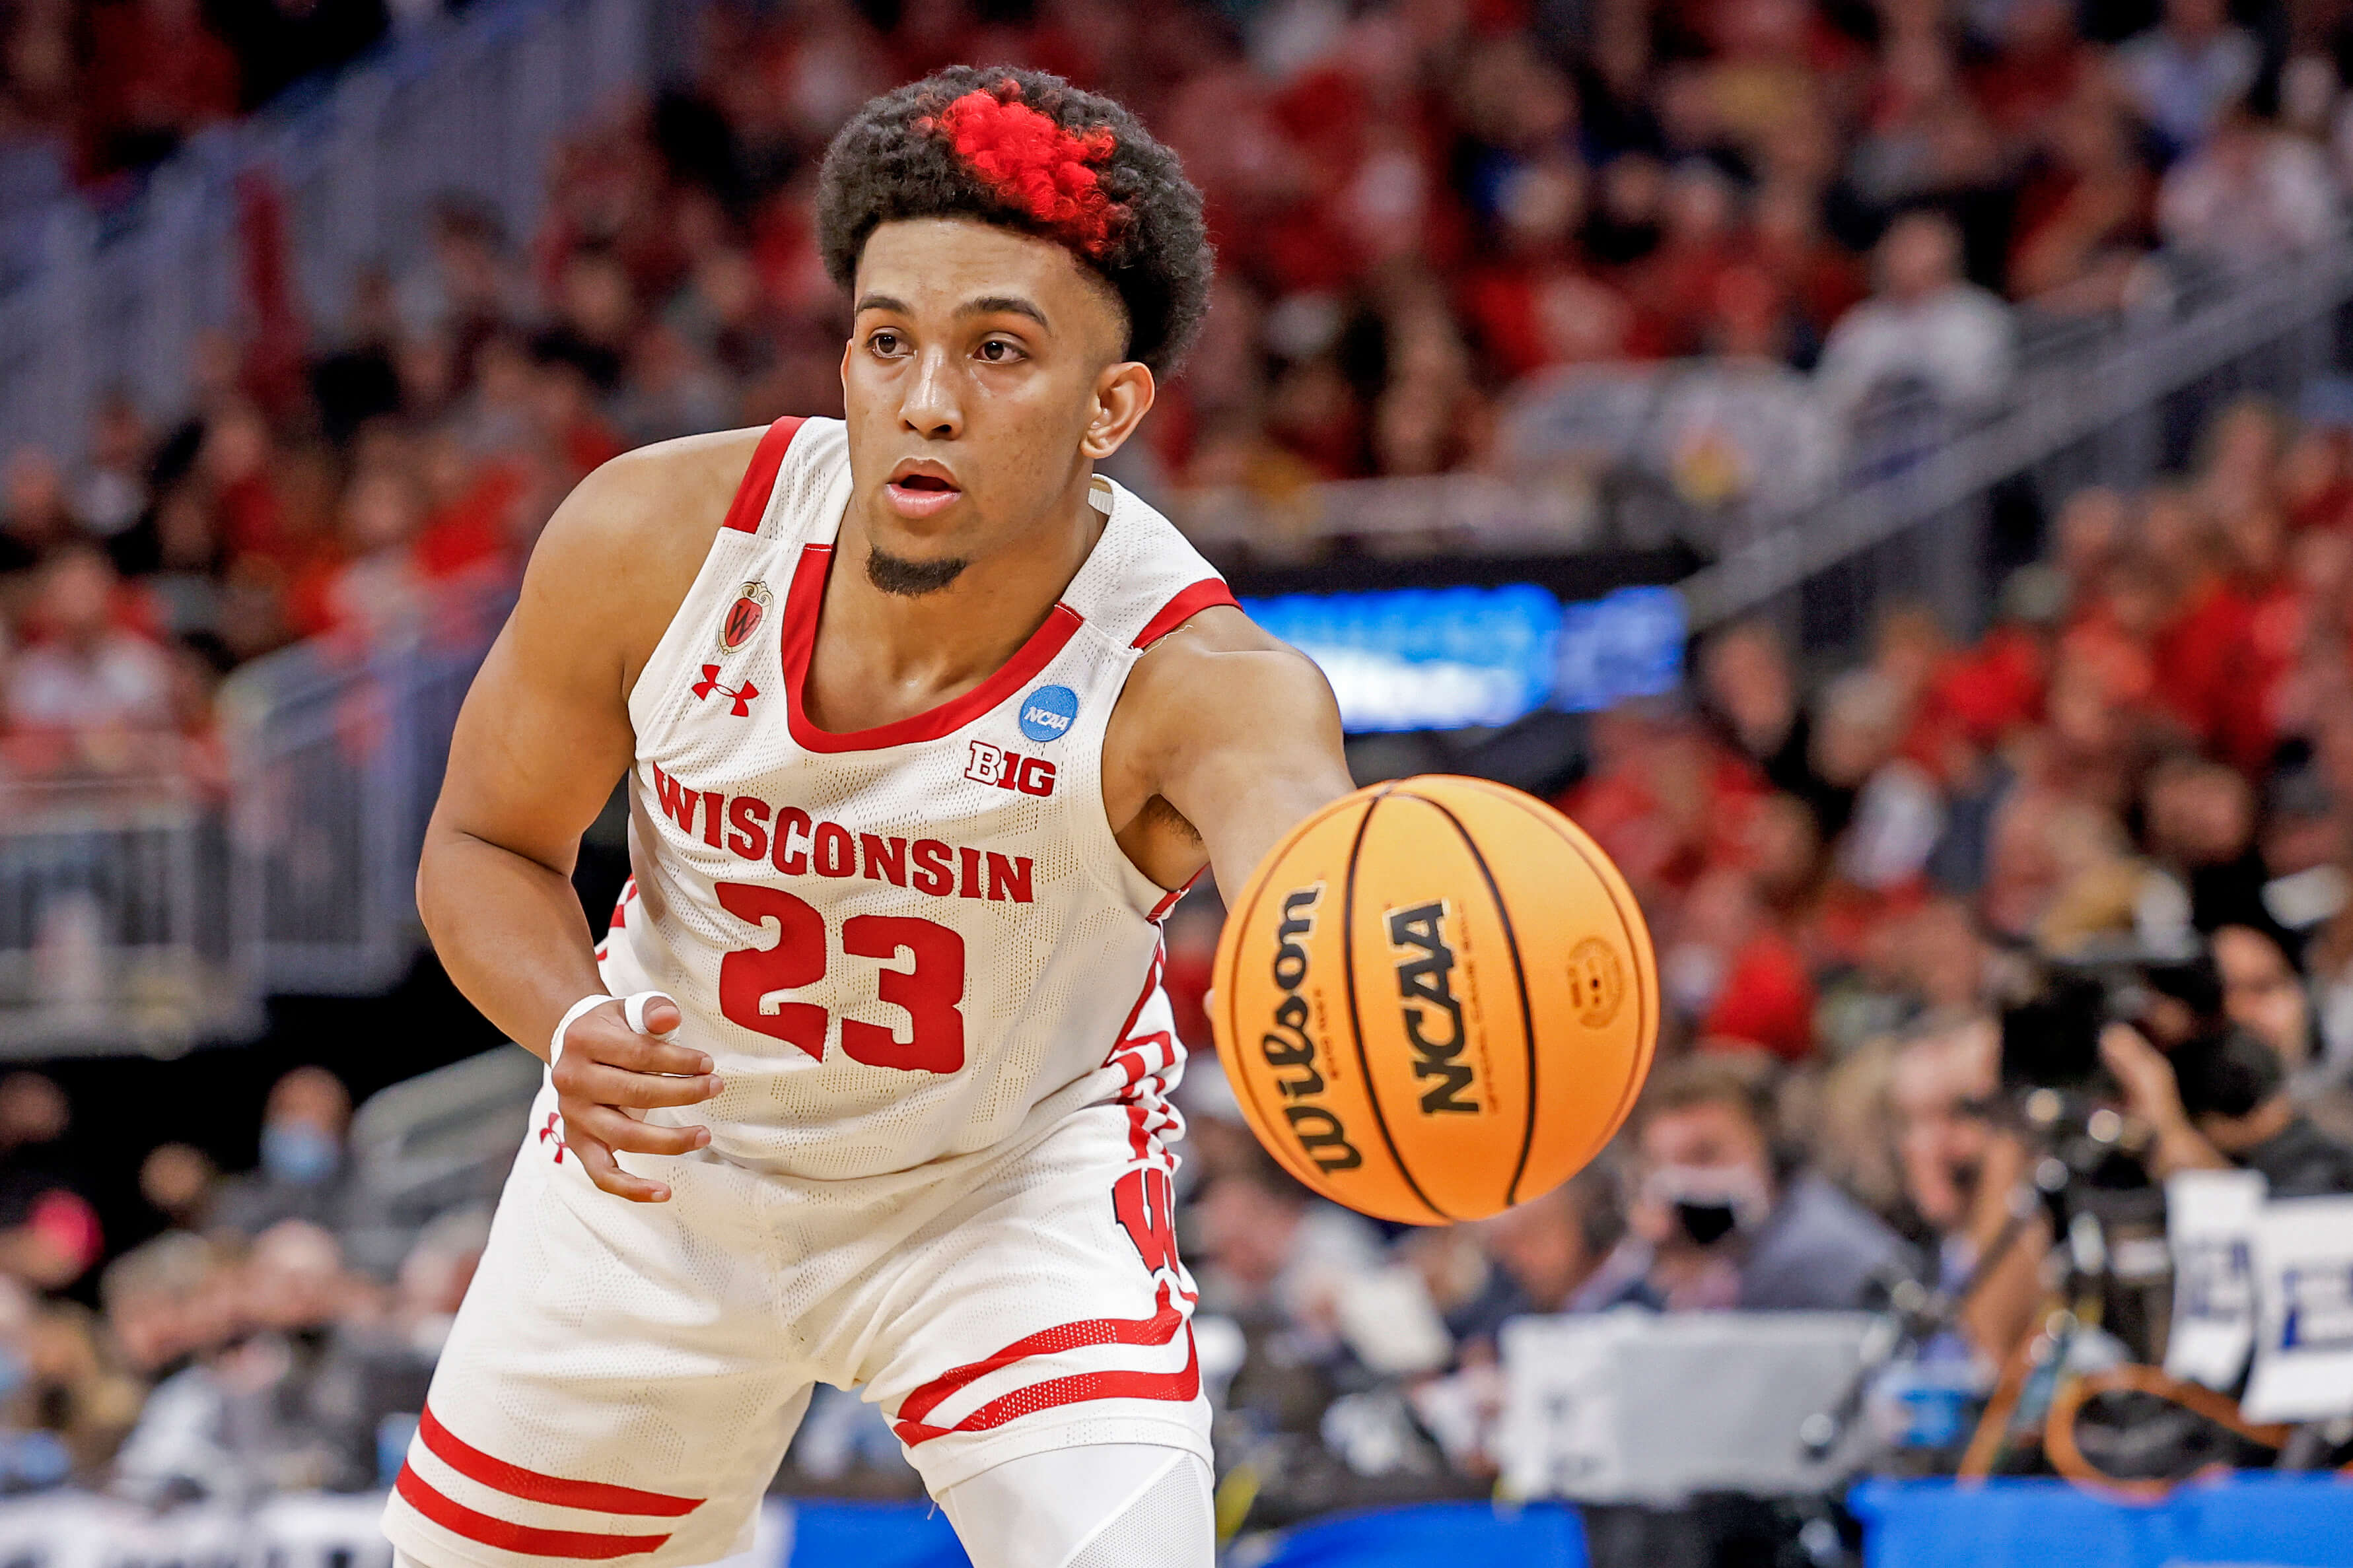 Iowa State vs Wisconsin Midwest Region Picks: Slow Tempo on Both Sides Creates Value